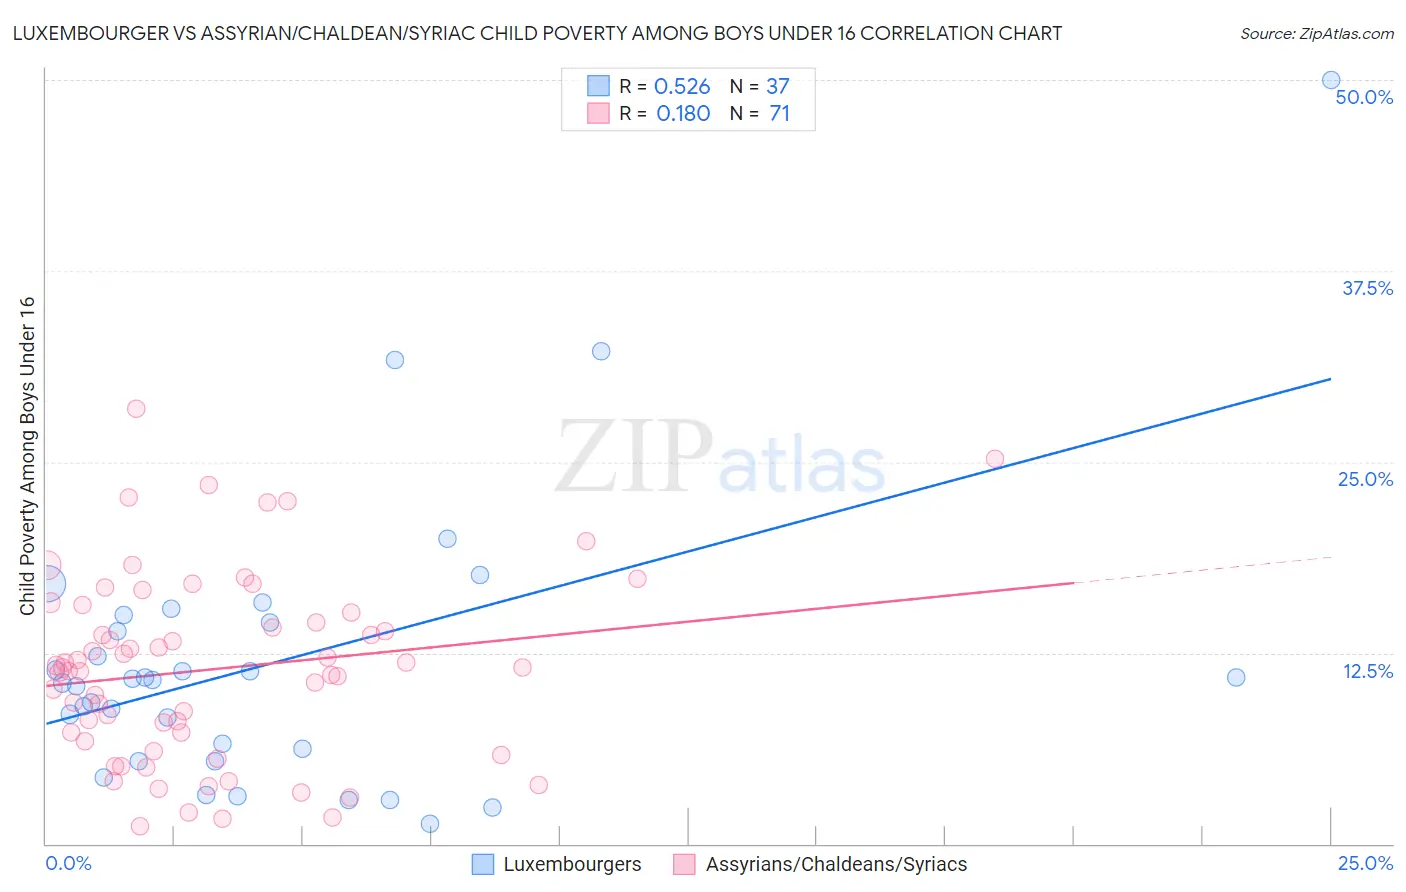 Luxembourger vs Assyrian/Chaldean/Syriac Child Poverty Among Boys Under 16